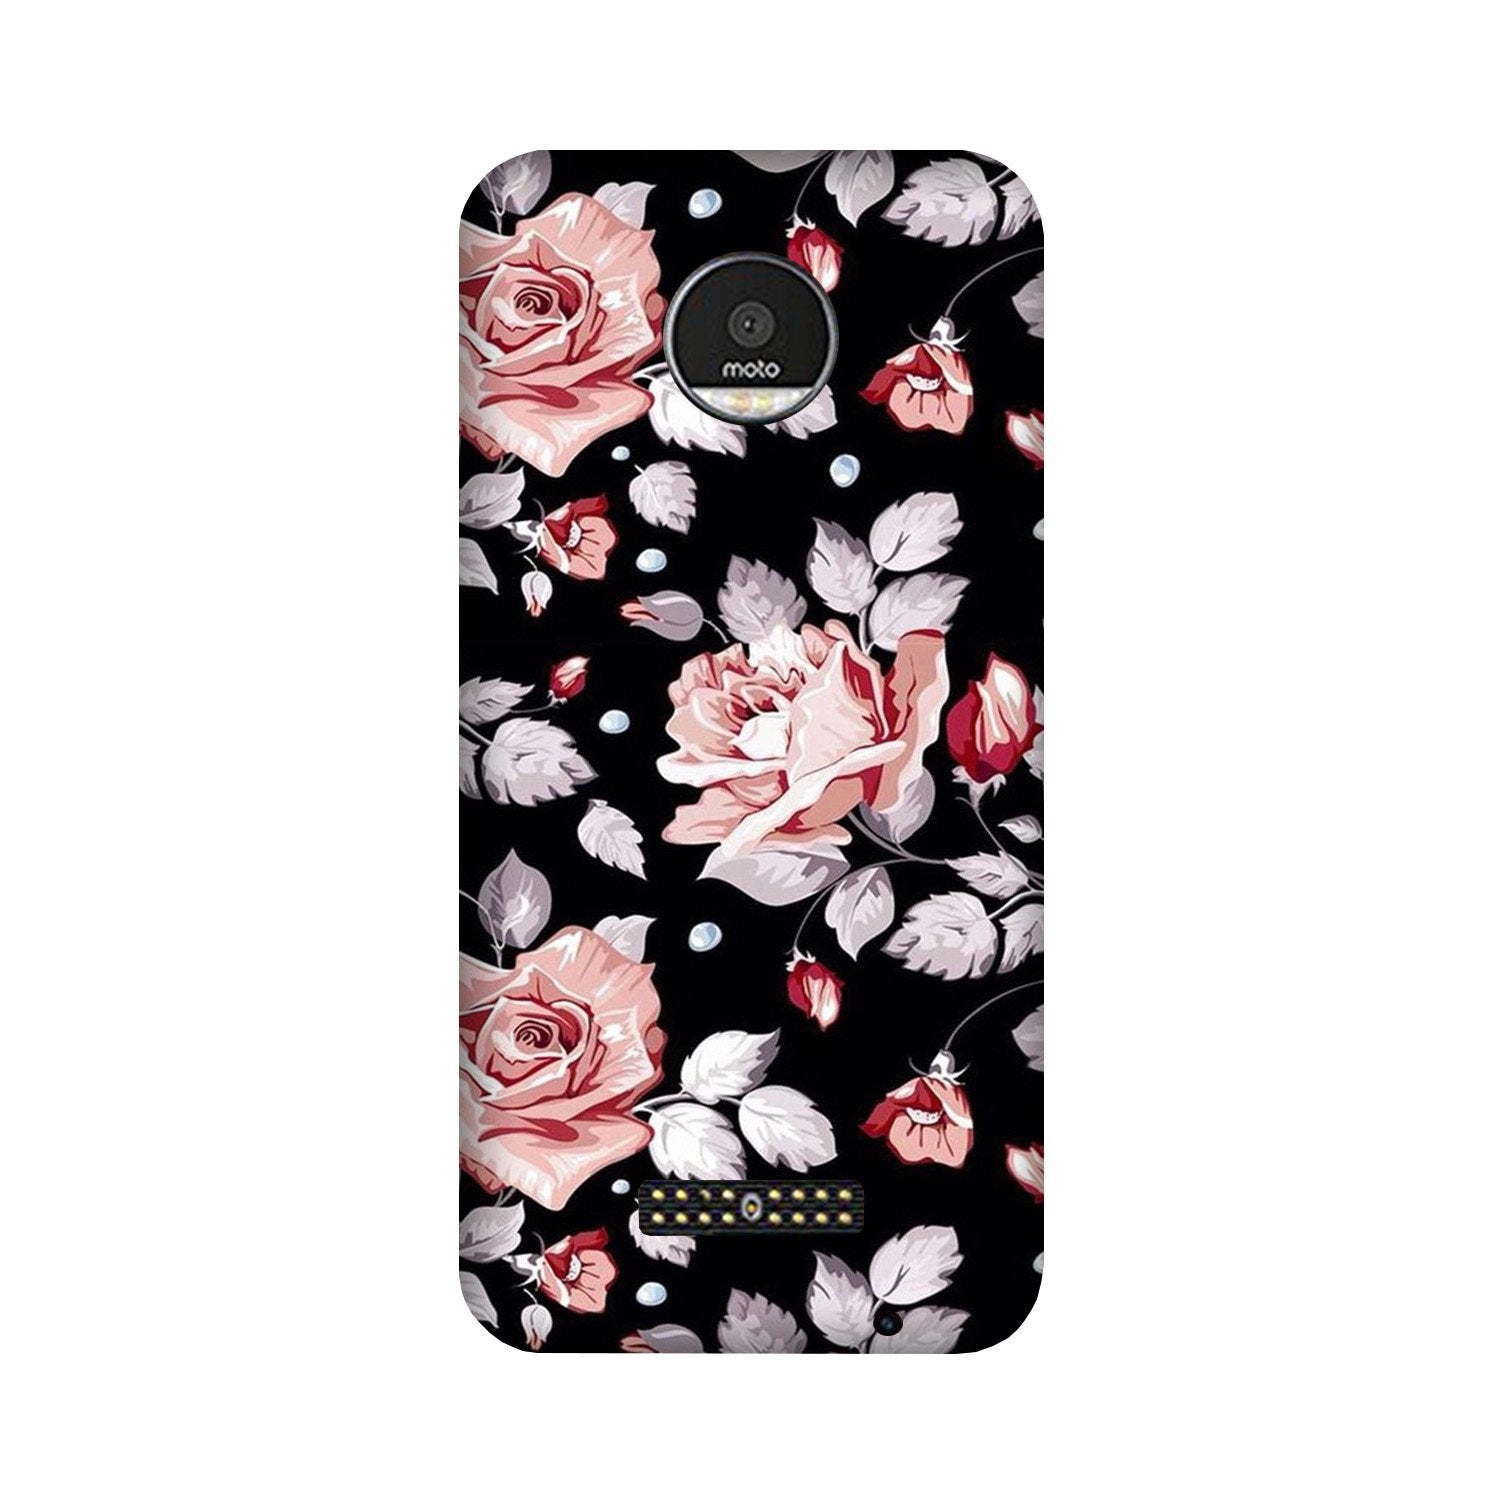 Pink rose Case for Moto Z Play